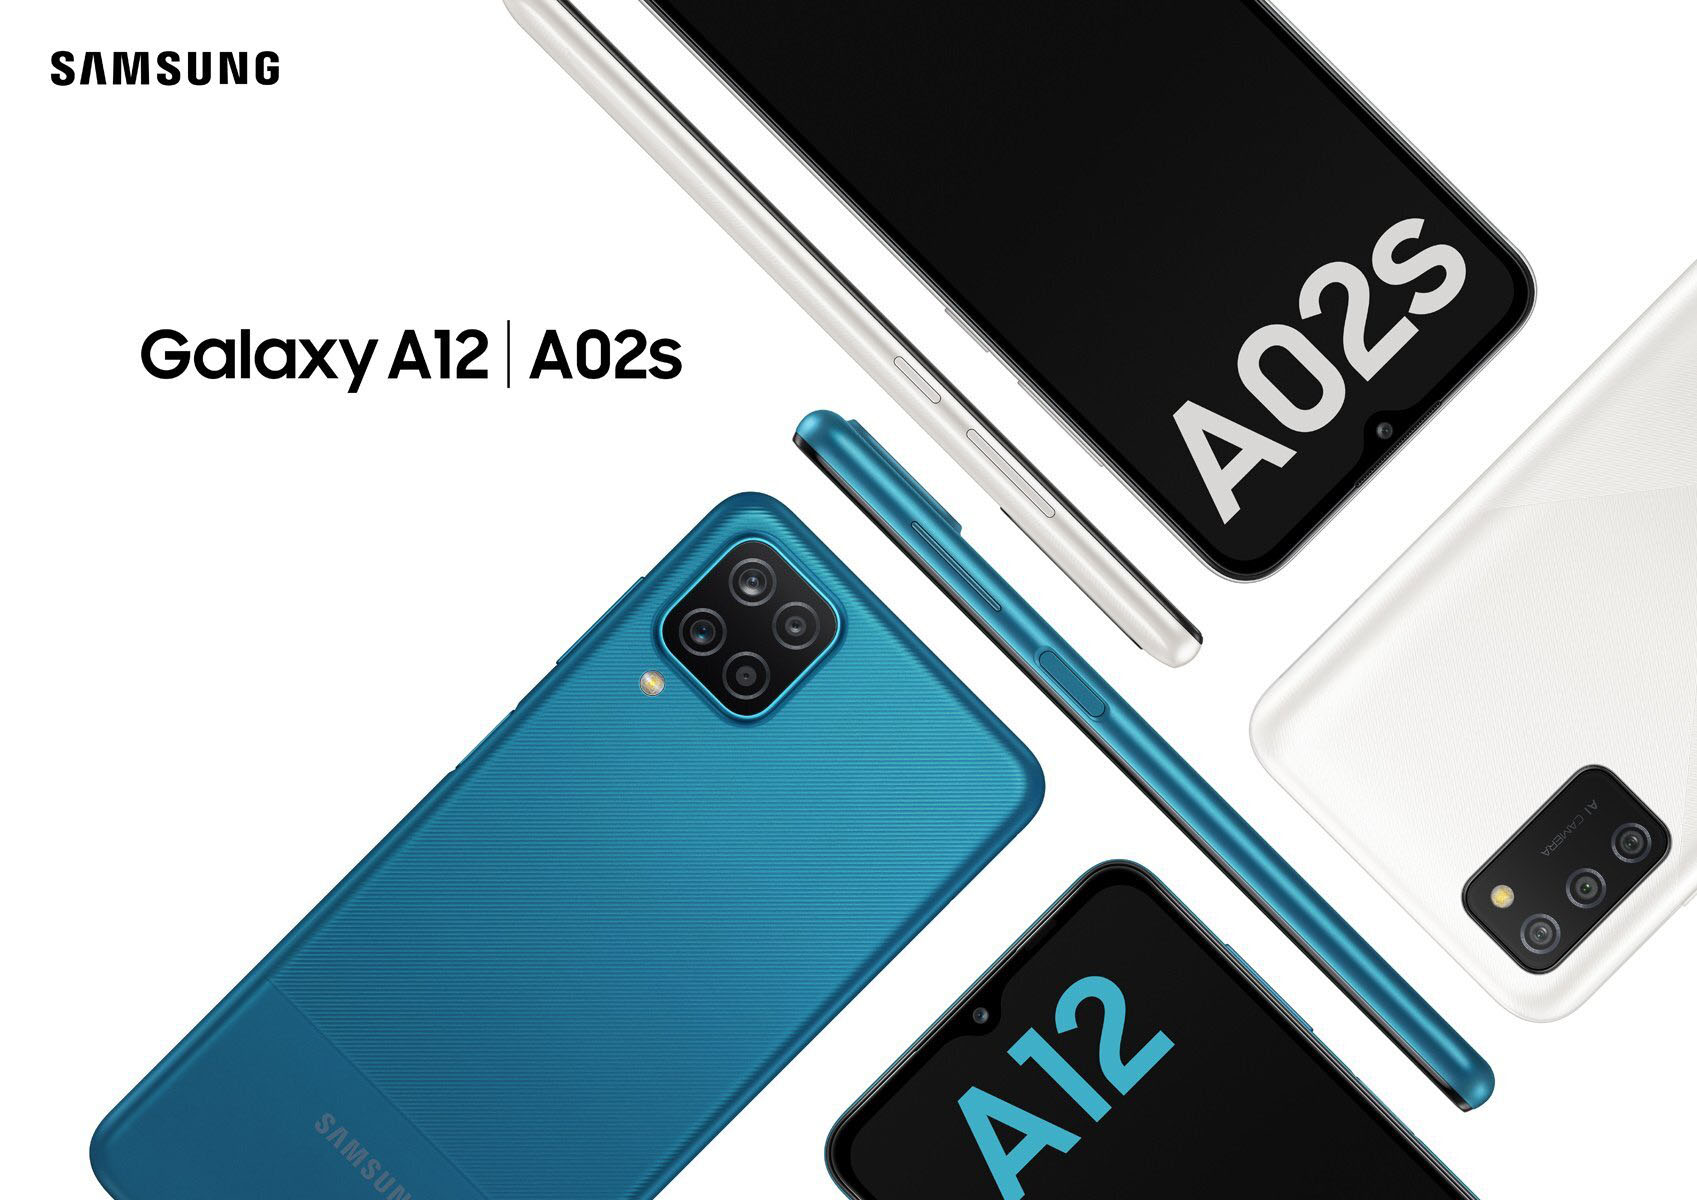 Samsung Galaxy A02s and A12